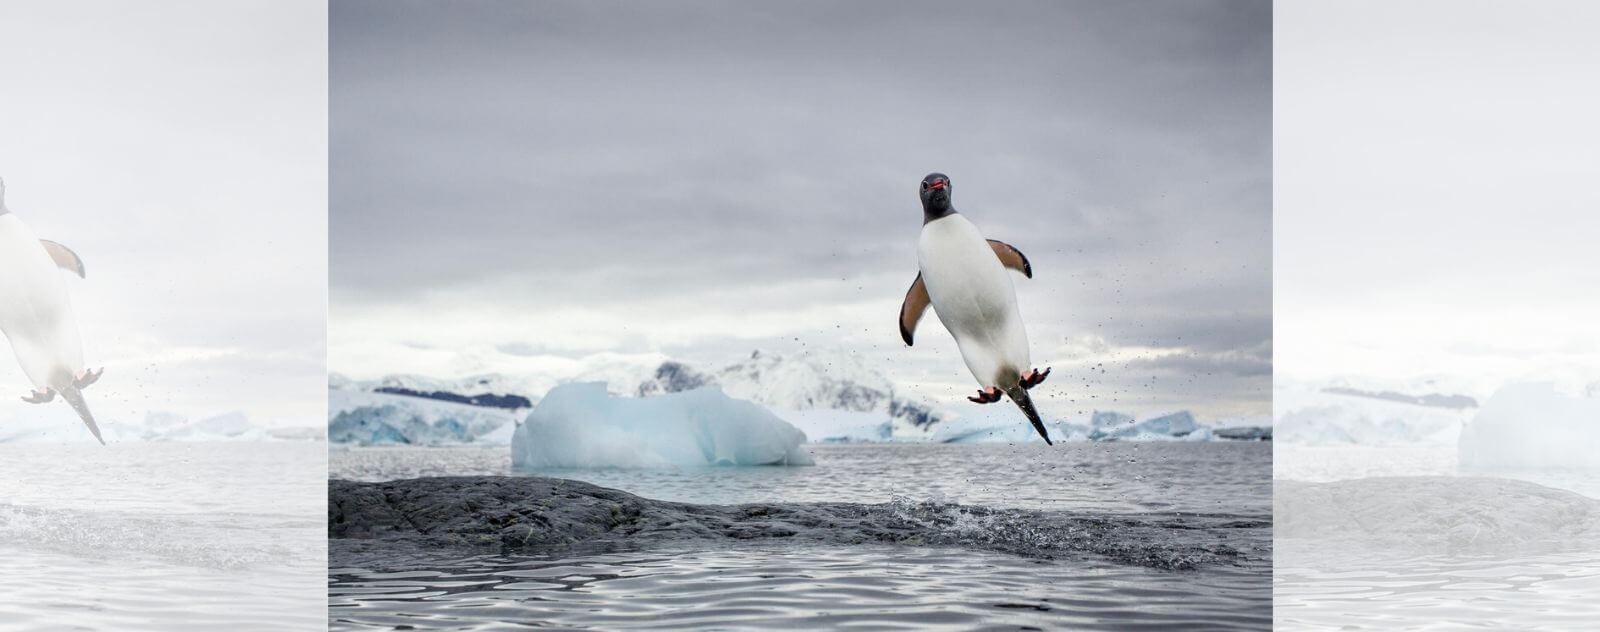 Penguin Jumping out of the Water